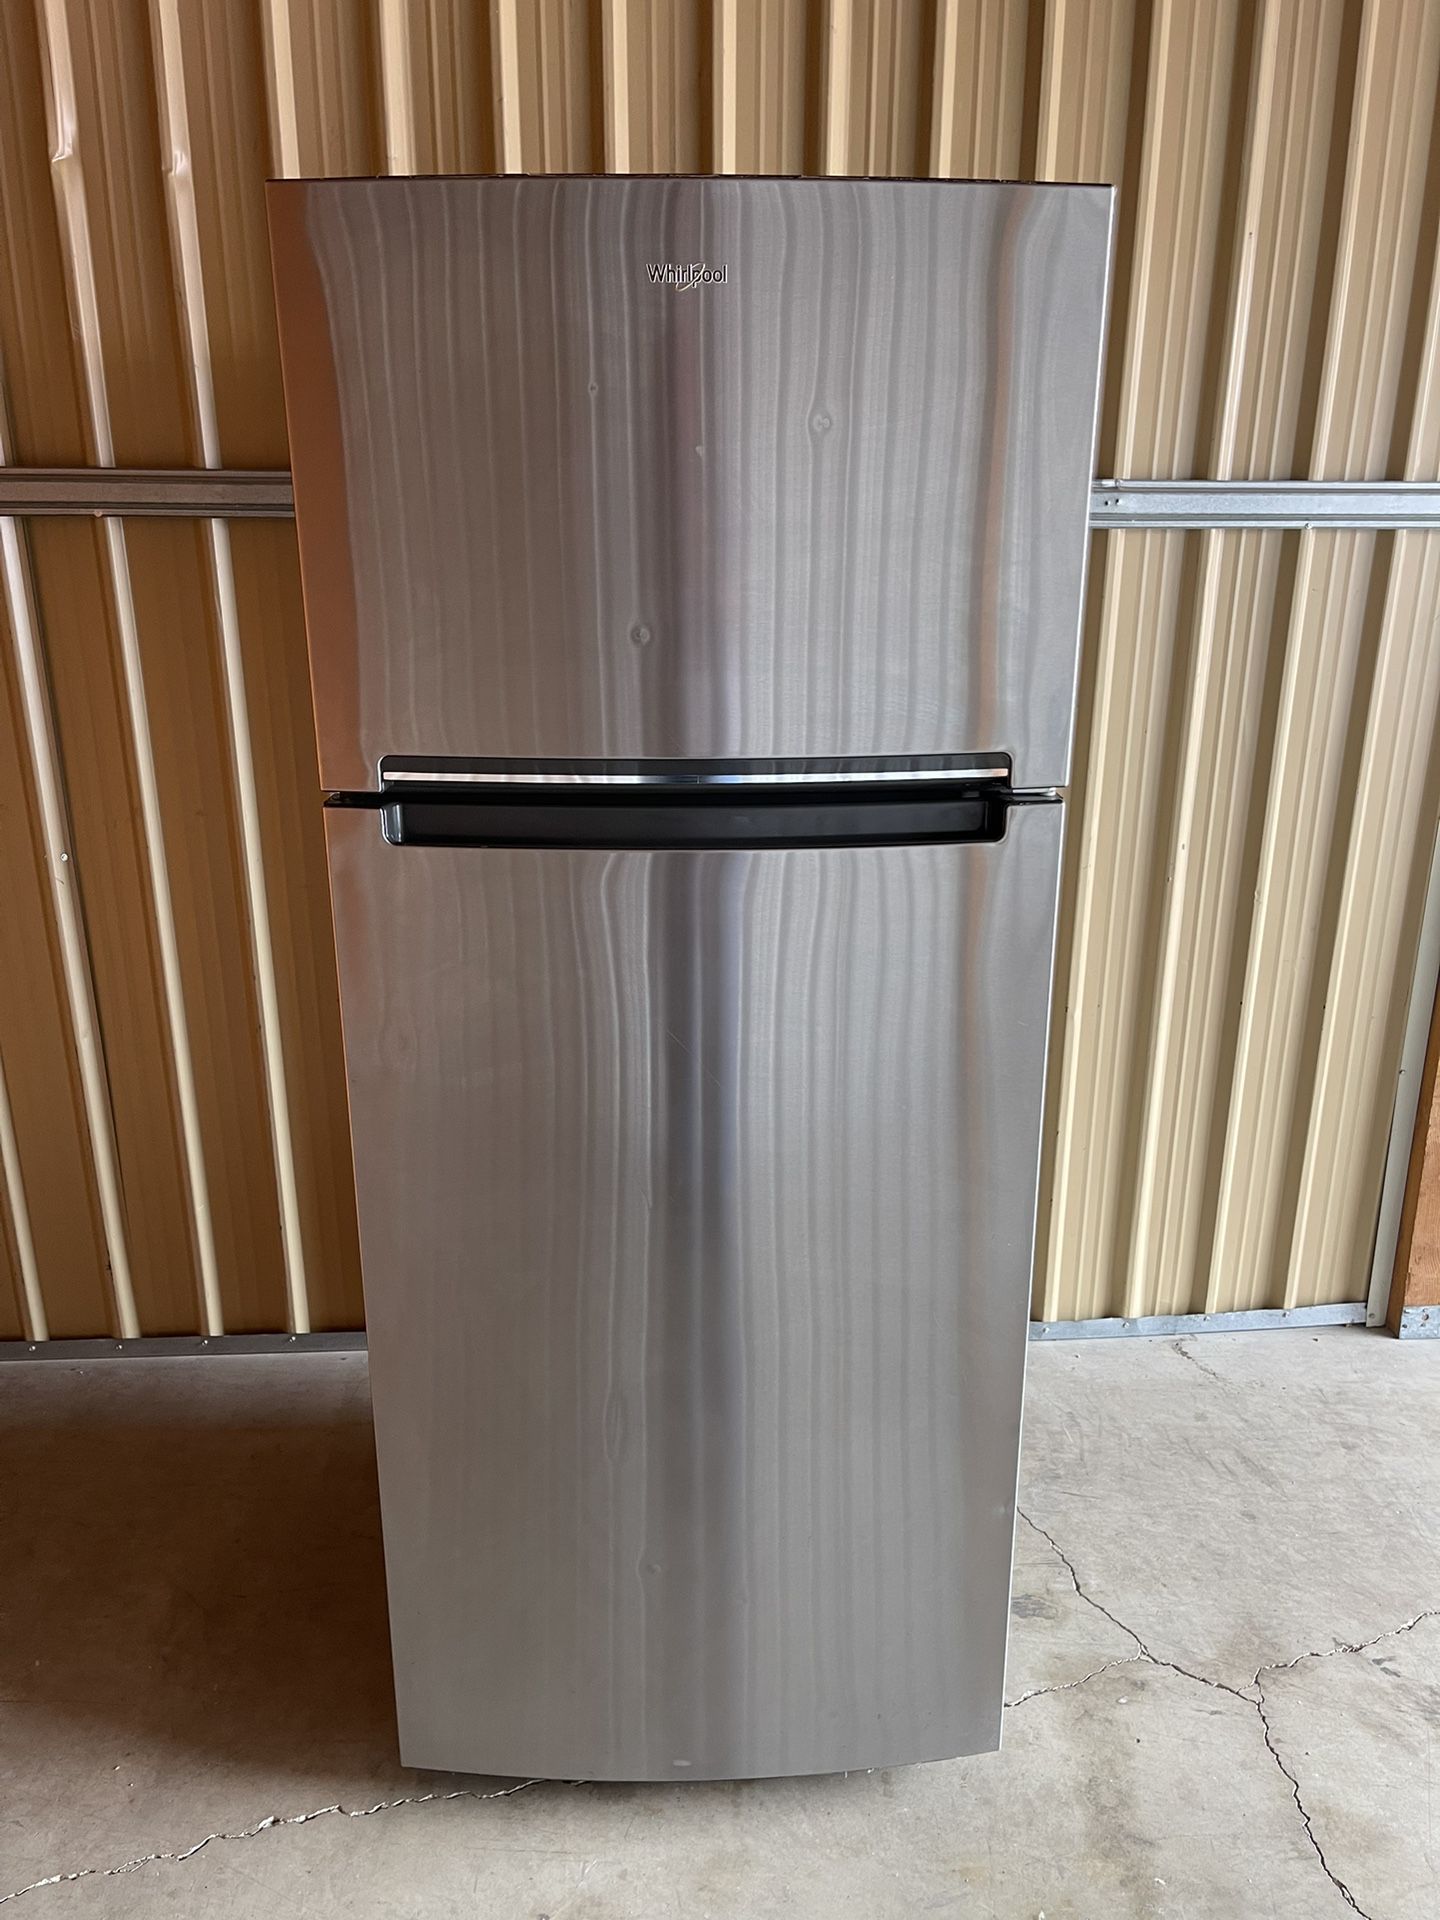 WHIRLPOOL STAINLESS STELL REFRIGERATOR $300 OBO *** EVERYTHING WORKS GREAT, 90 DAY WARRANTY,  DELIVERY AVAILABLE 